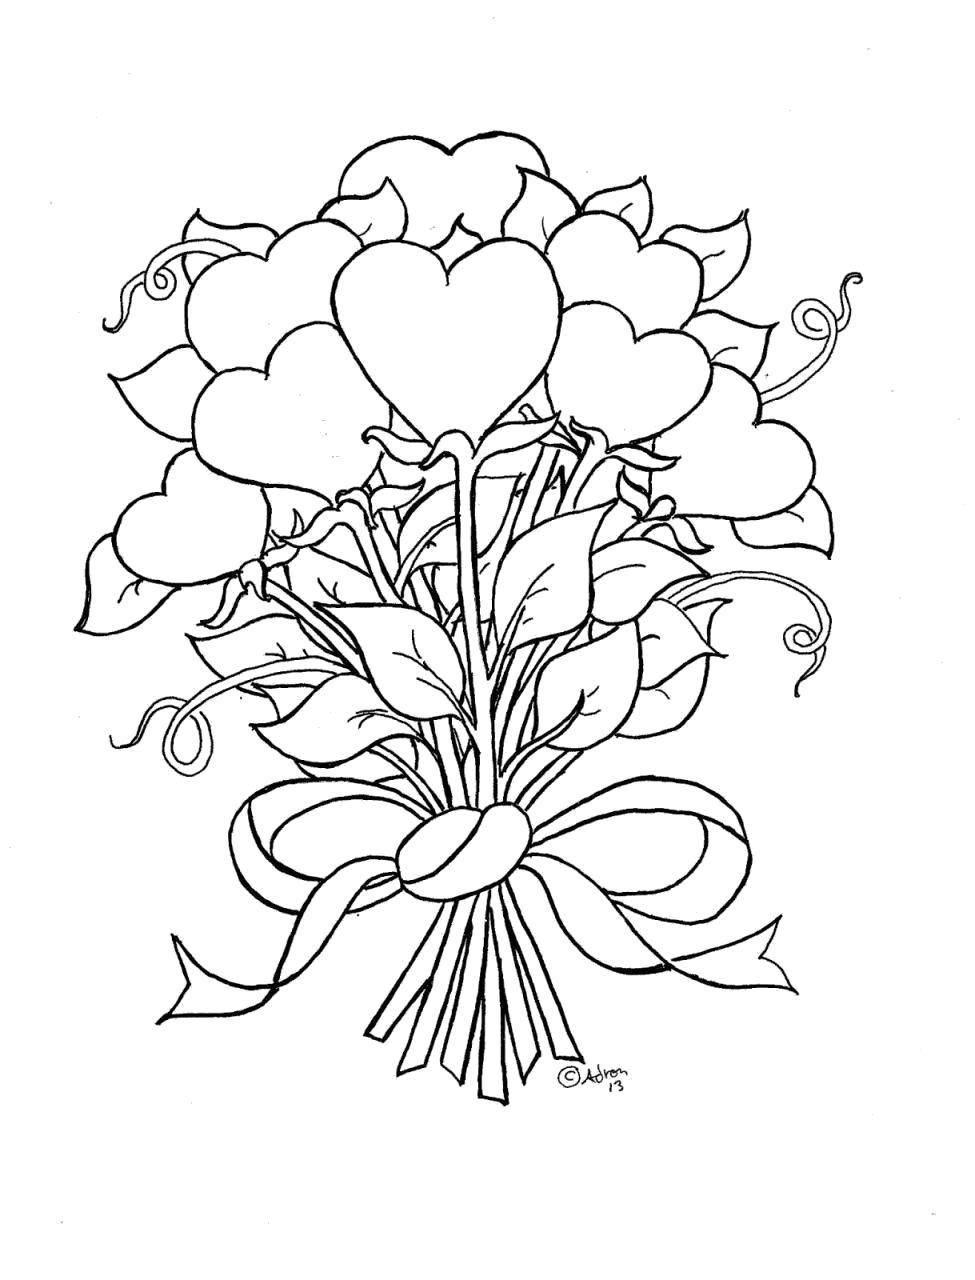 Coloring Bouquet of hearts. Category Hearts. Tags:  Heart, love, rose.